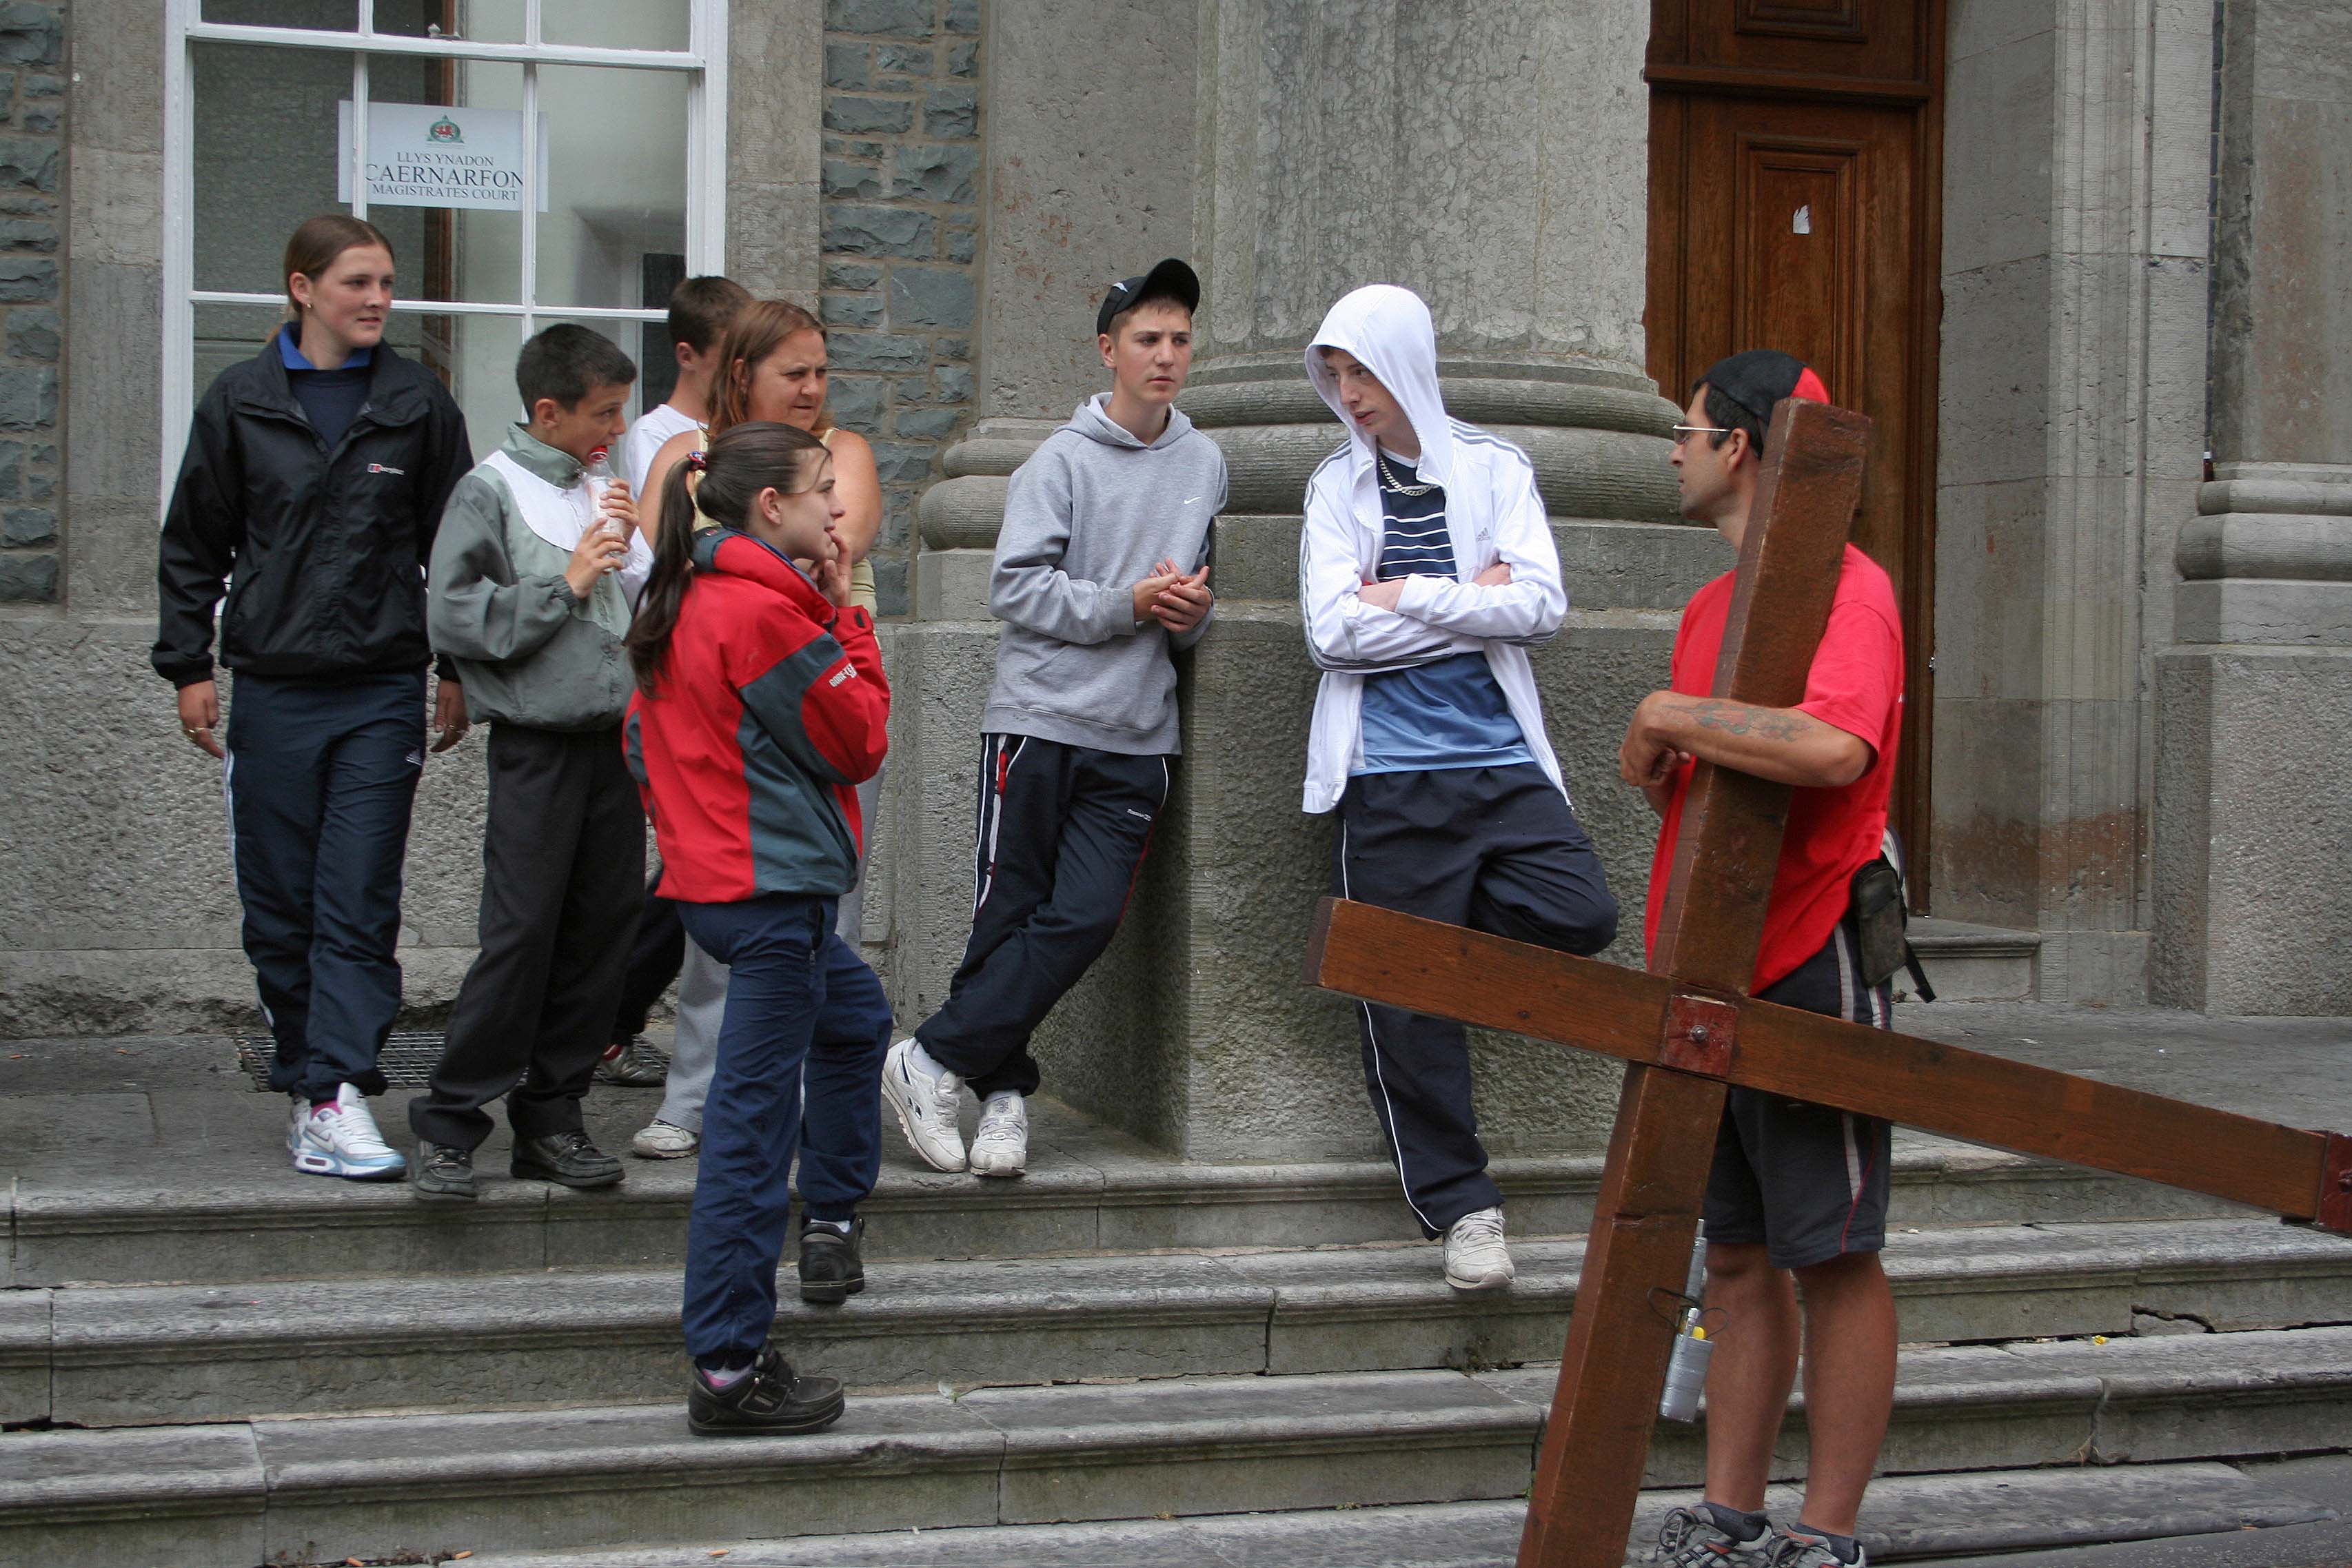 Counties evangelist Clive Cornish stops while carrying his cross to talk with a group of young people outside Caernarfon Magistrates Court